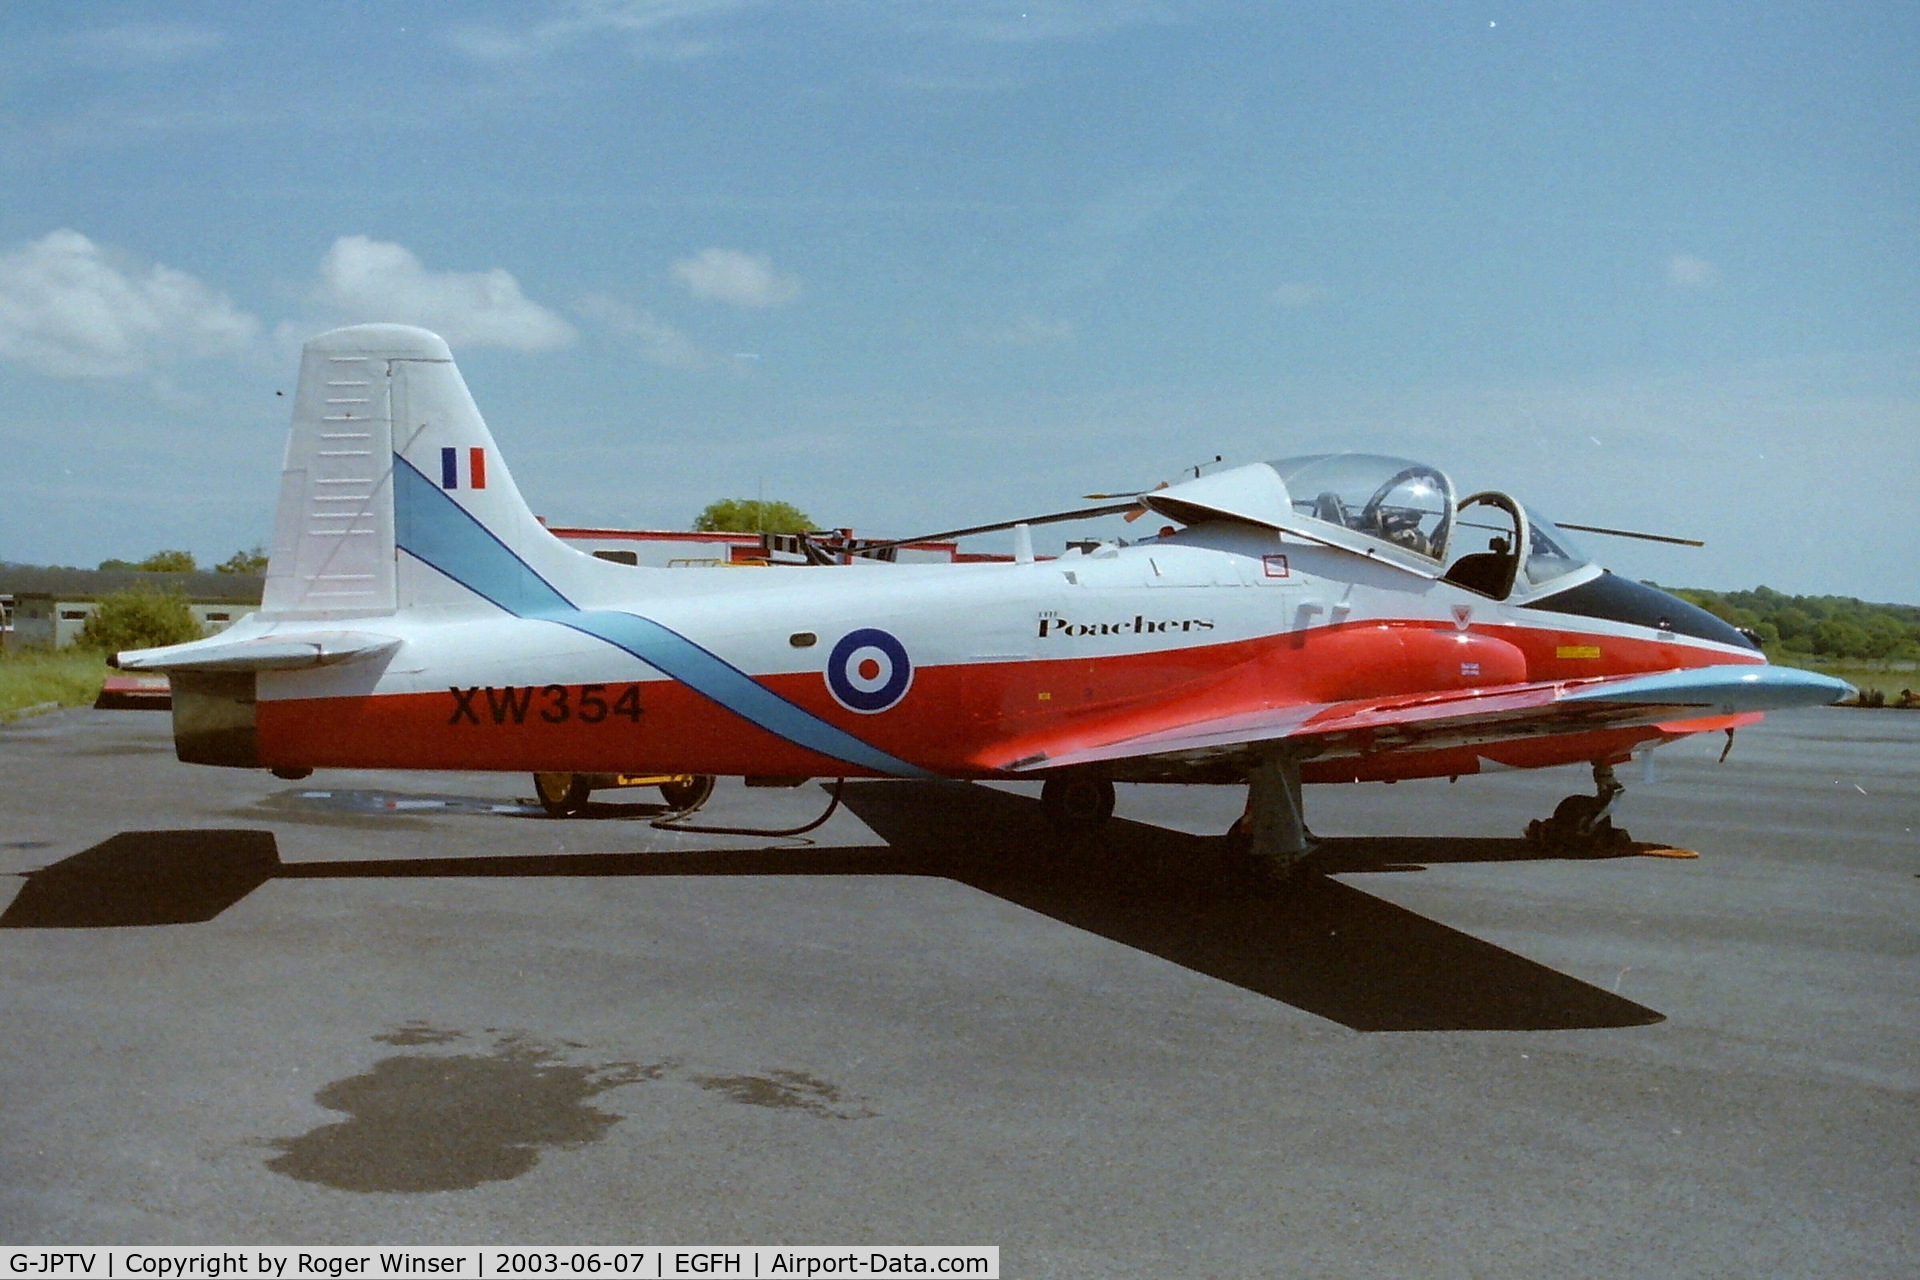 G-JPTV, 1971 BAC 84 Jet Provost T.5A C/N EEP/JP/1005, Previously in a yellow and blue colour scheme. Seen newly repainted in RAF Poachers aerobatic team colours representing the lead aircraft XW354 in the mid 1970's. This aircraft was  XW355 in RAF service. Operated by Gower Jets from Swansea Airport.